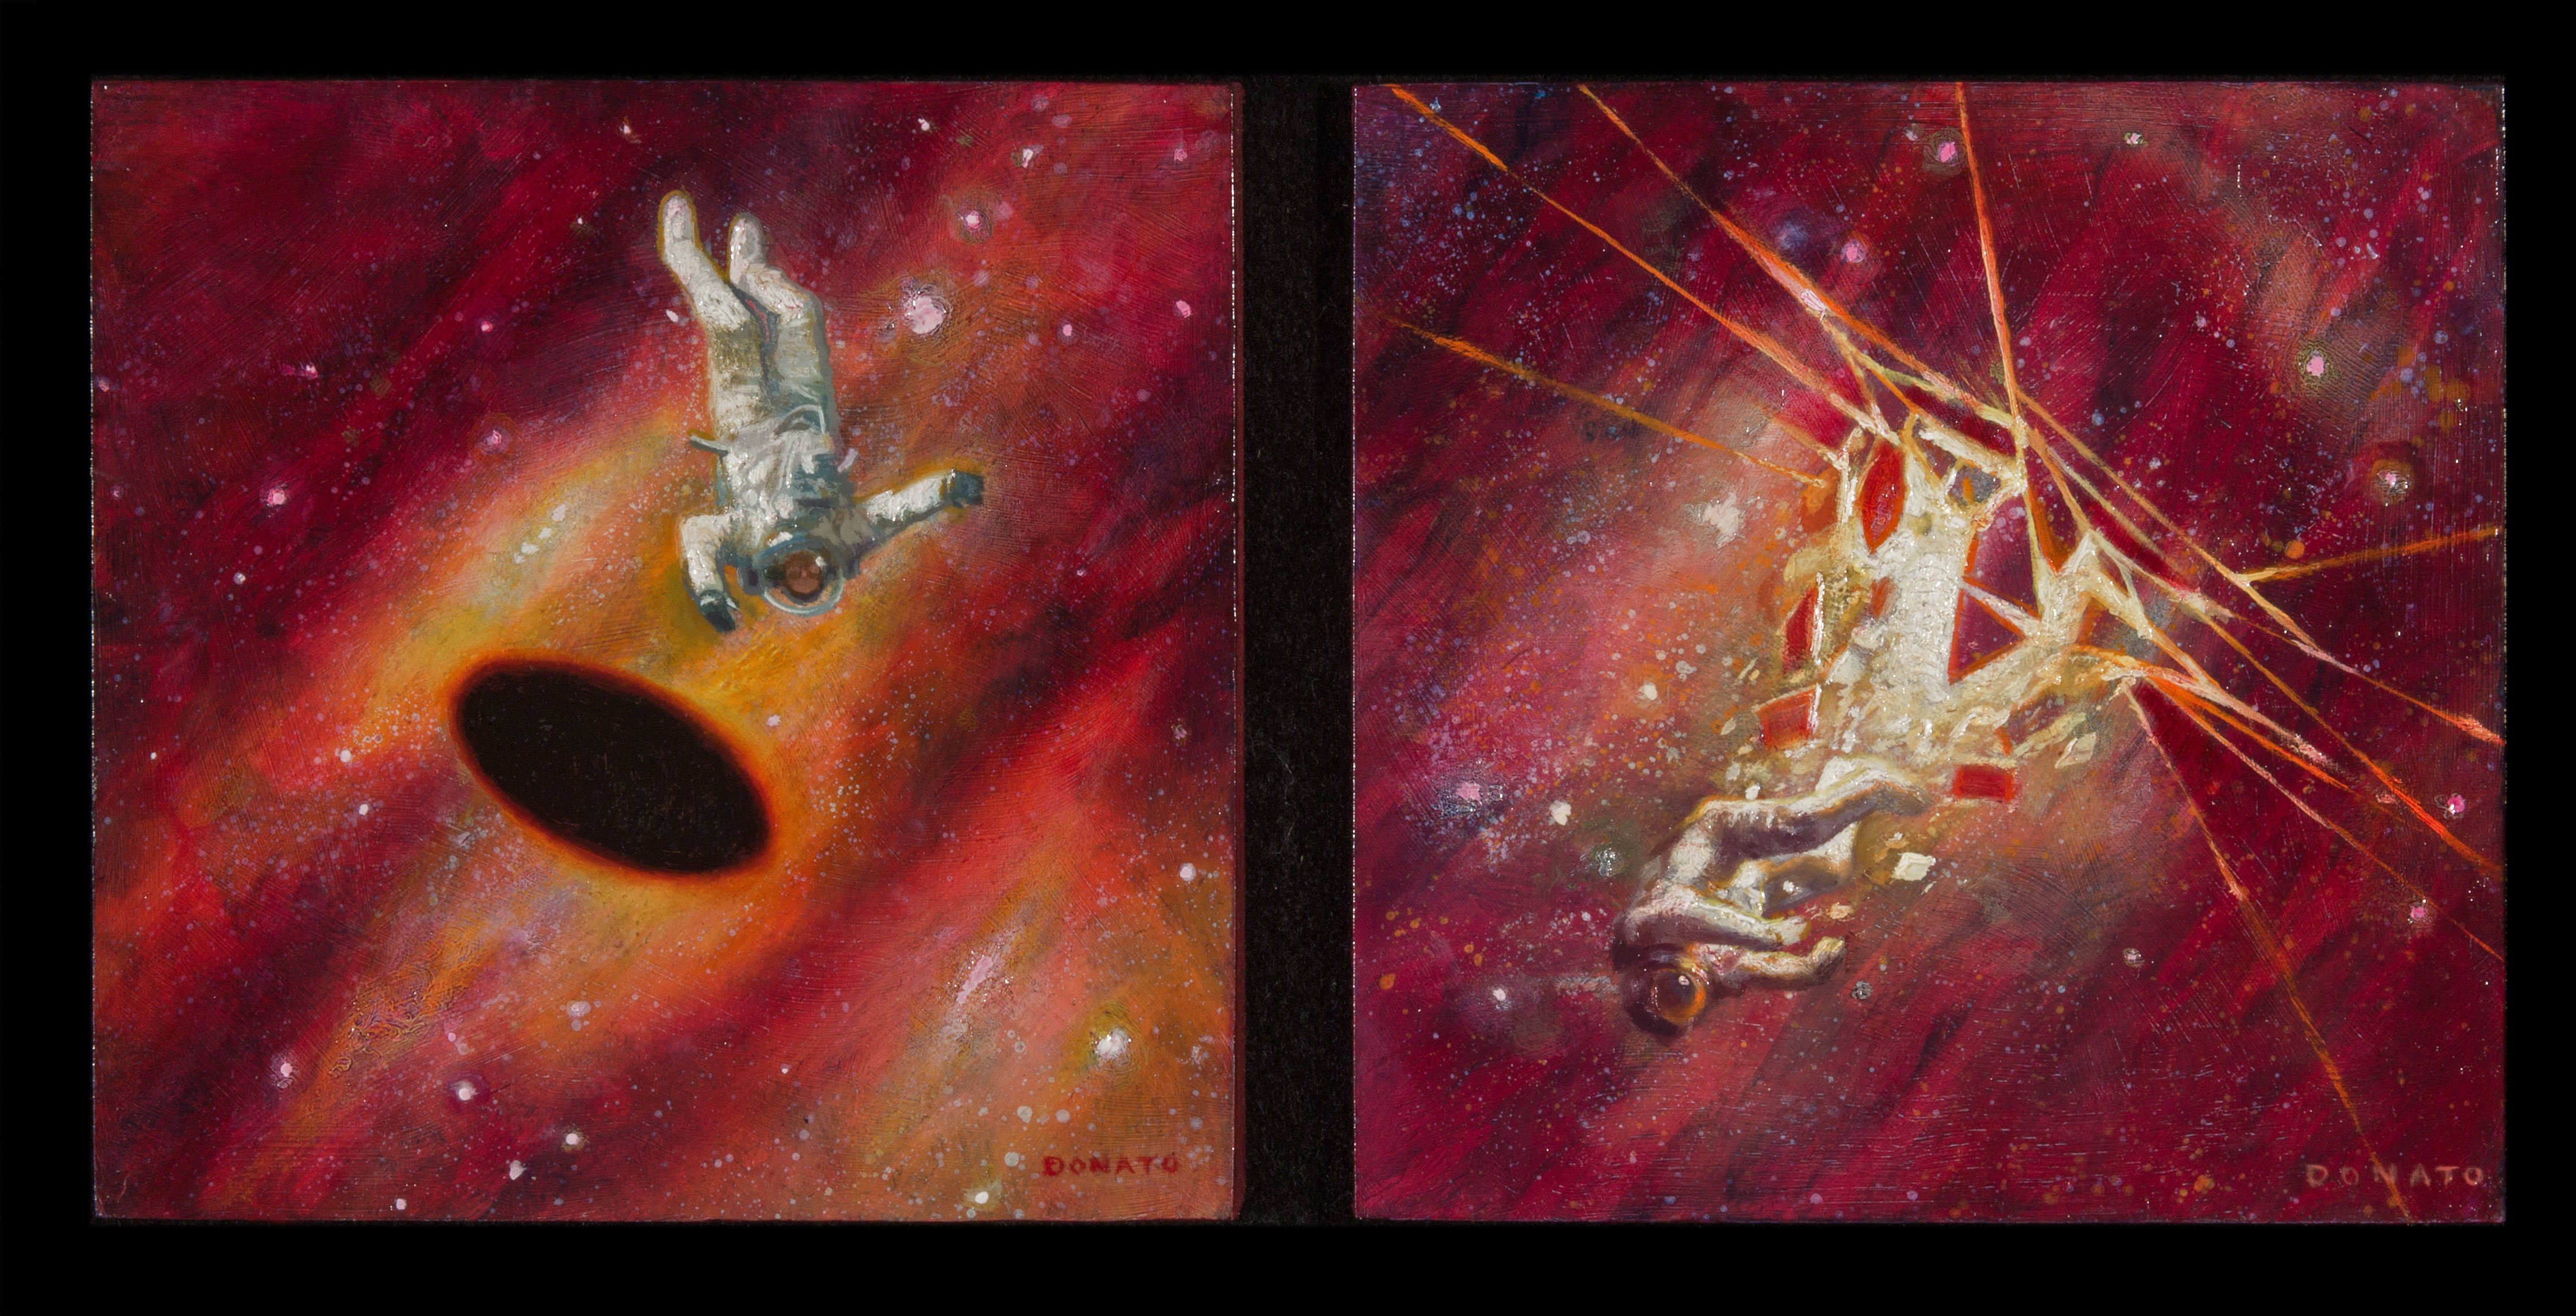 Extended Universe - studies
5" x 5" each  Oil on Panel  2019